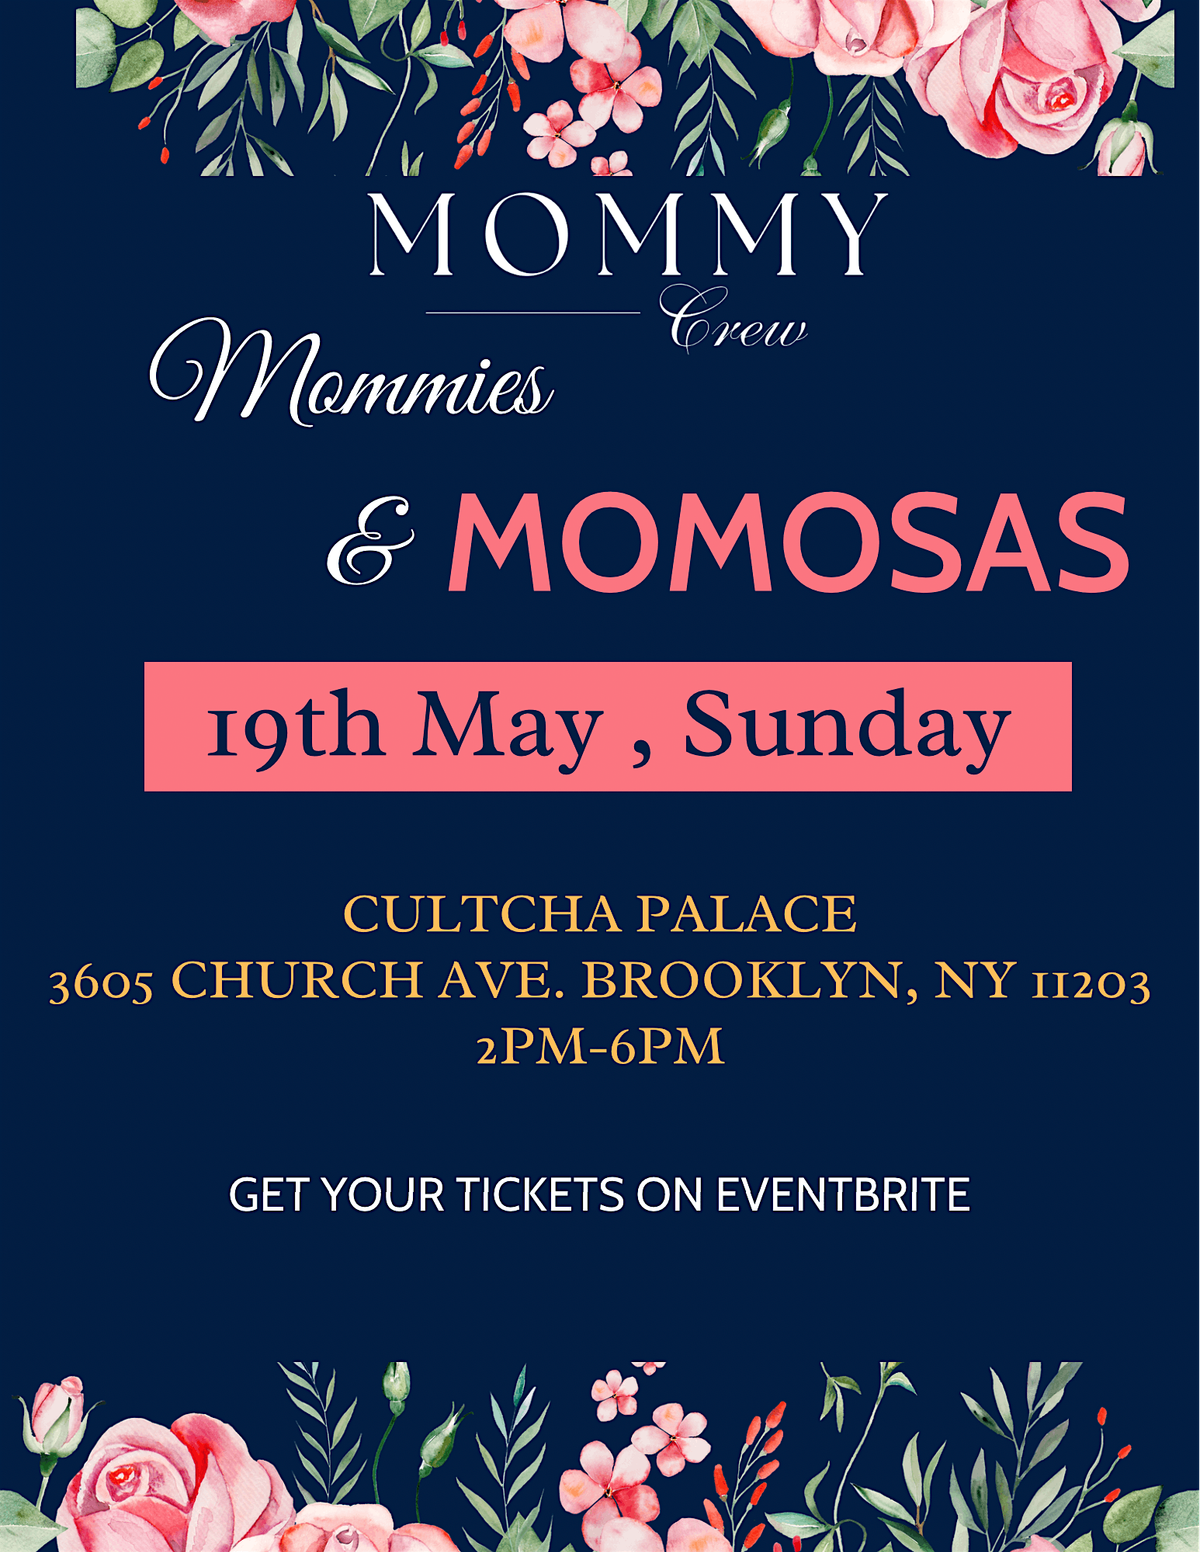 Mommy Crew\u2019s Mommies and Momosas